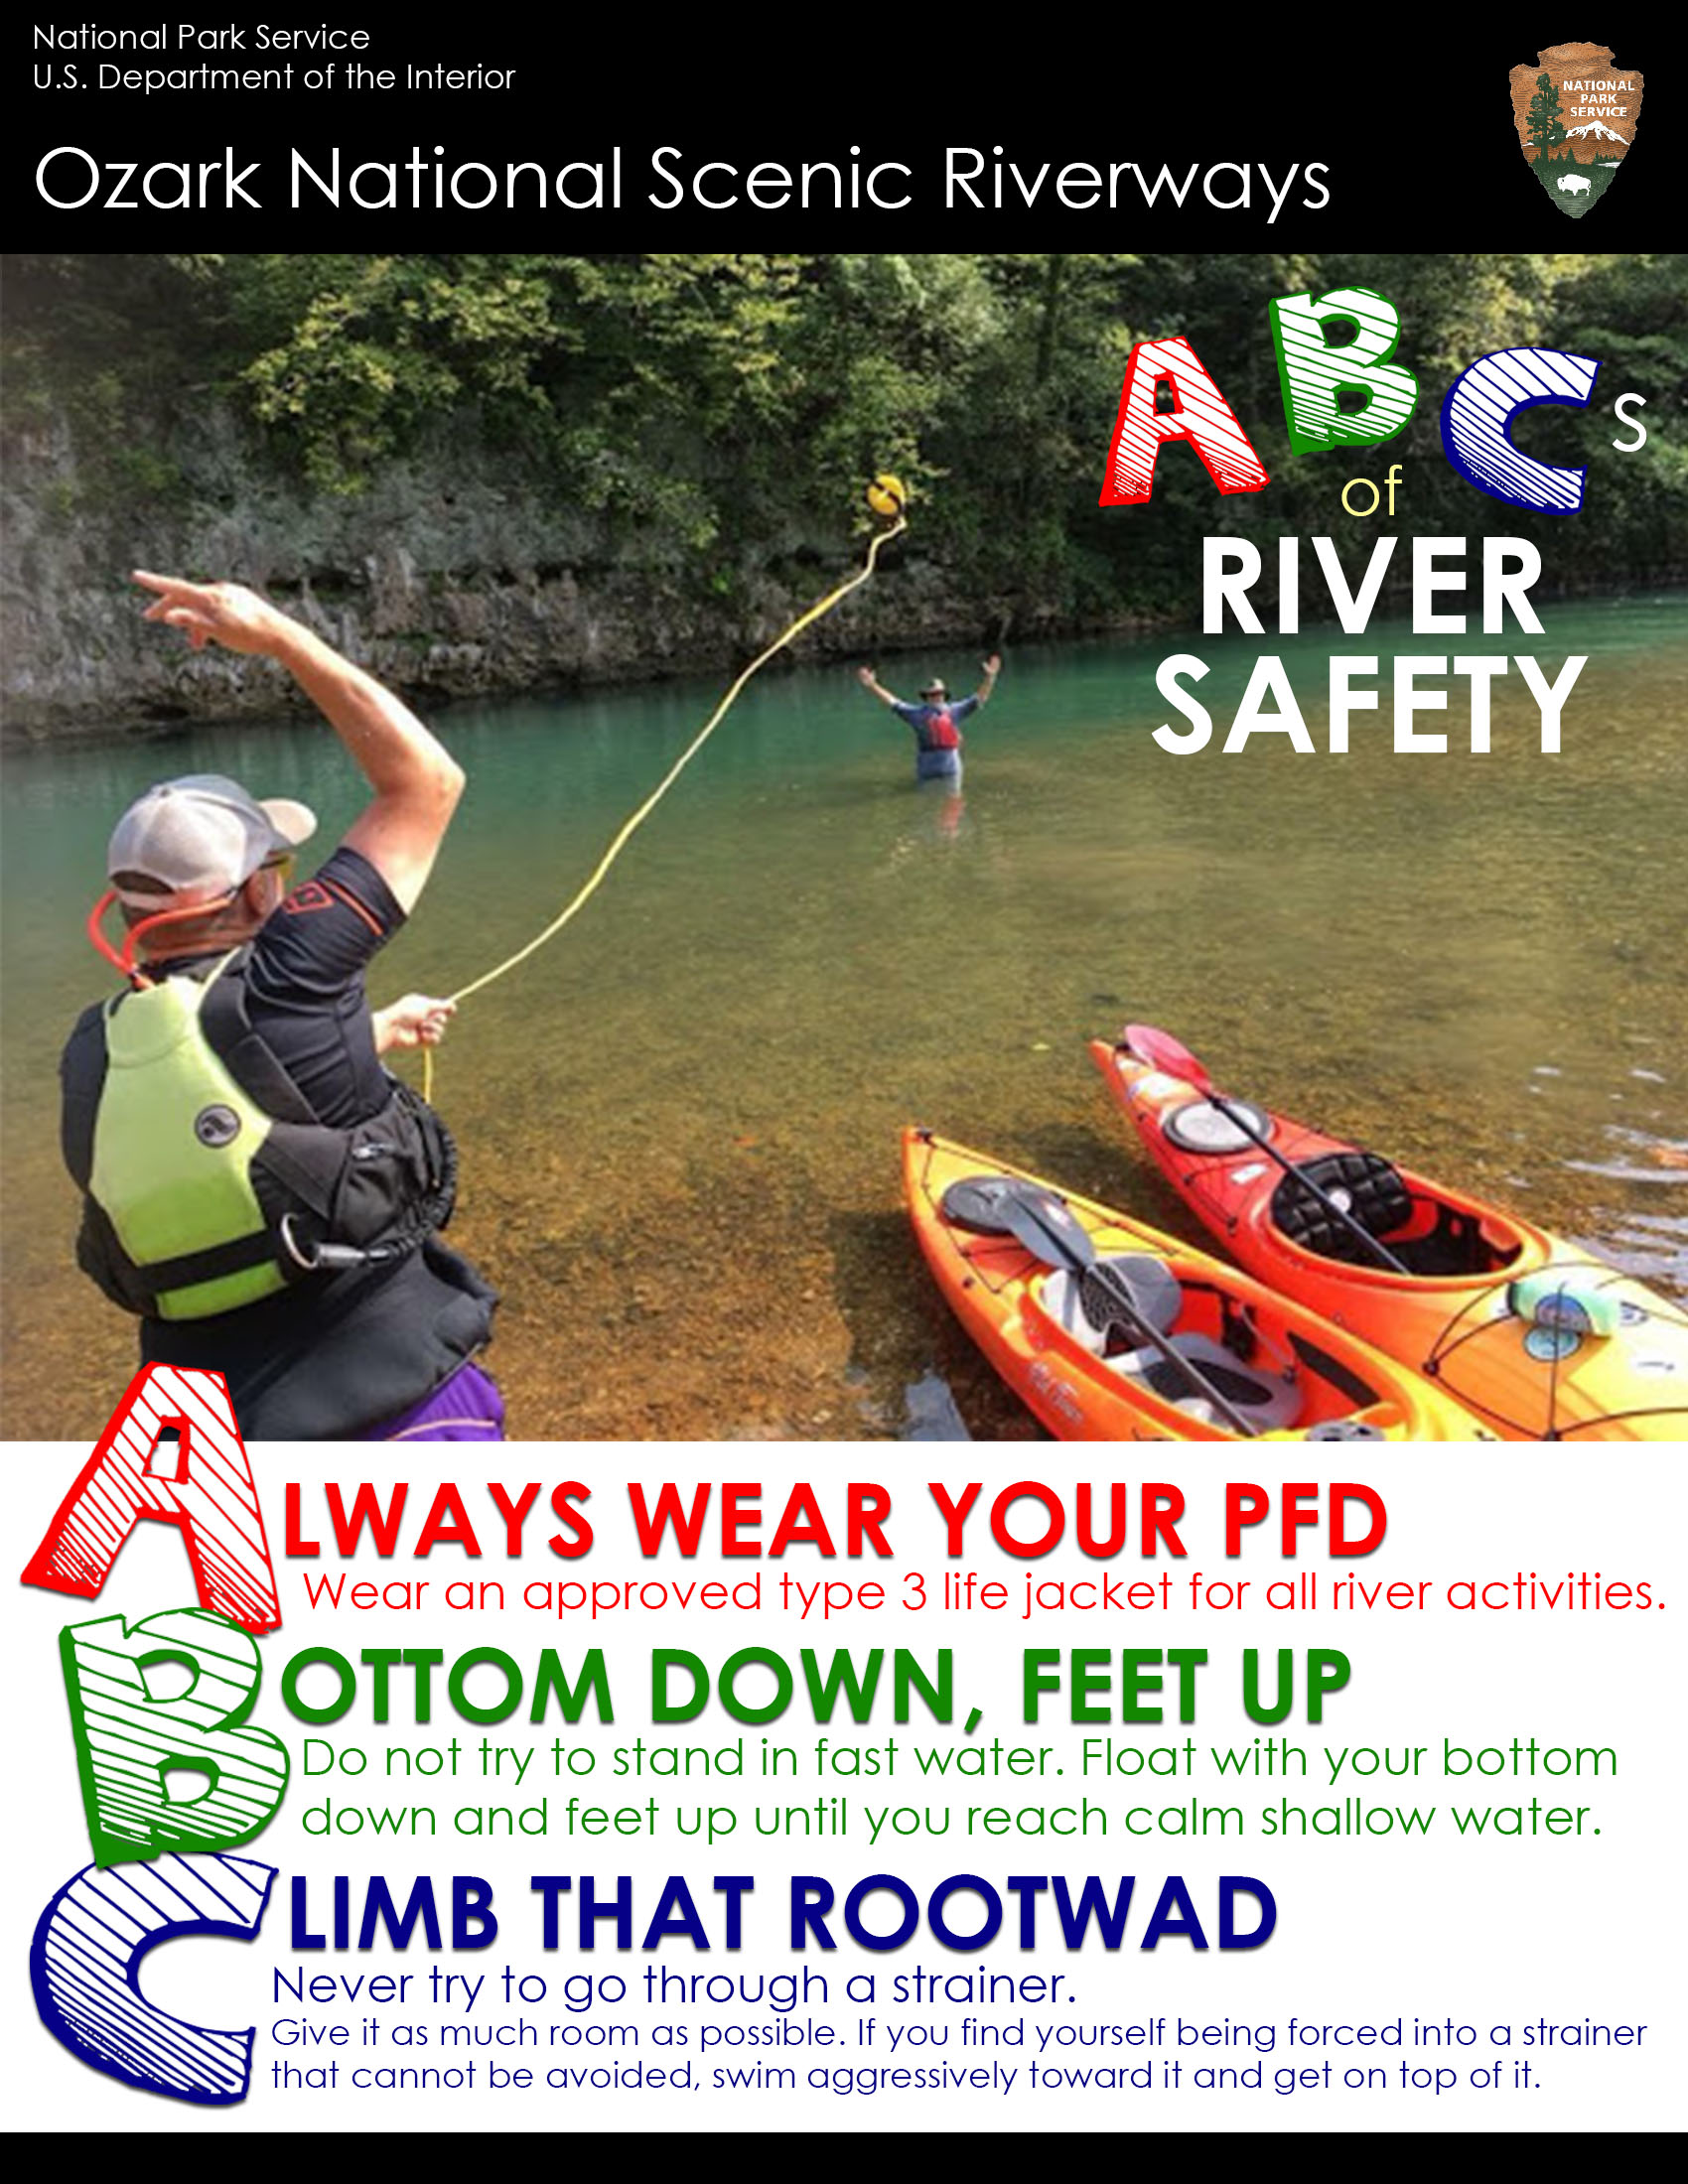 Know the Basics of River Safety Before Your Summer Float Trip